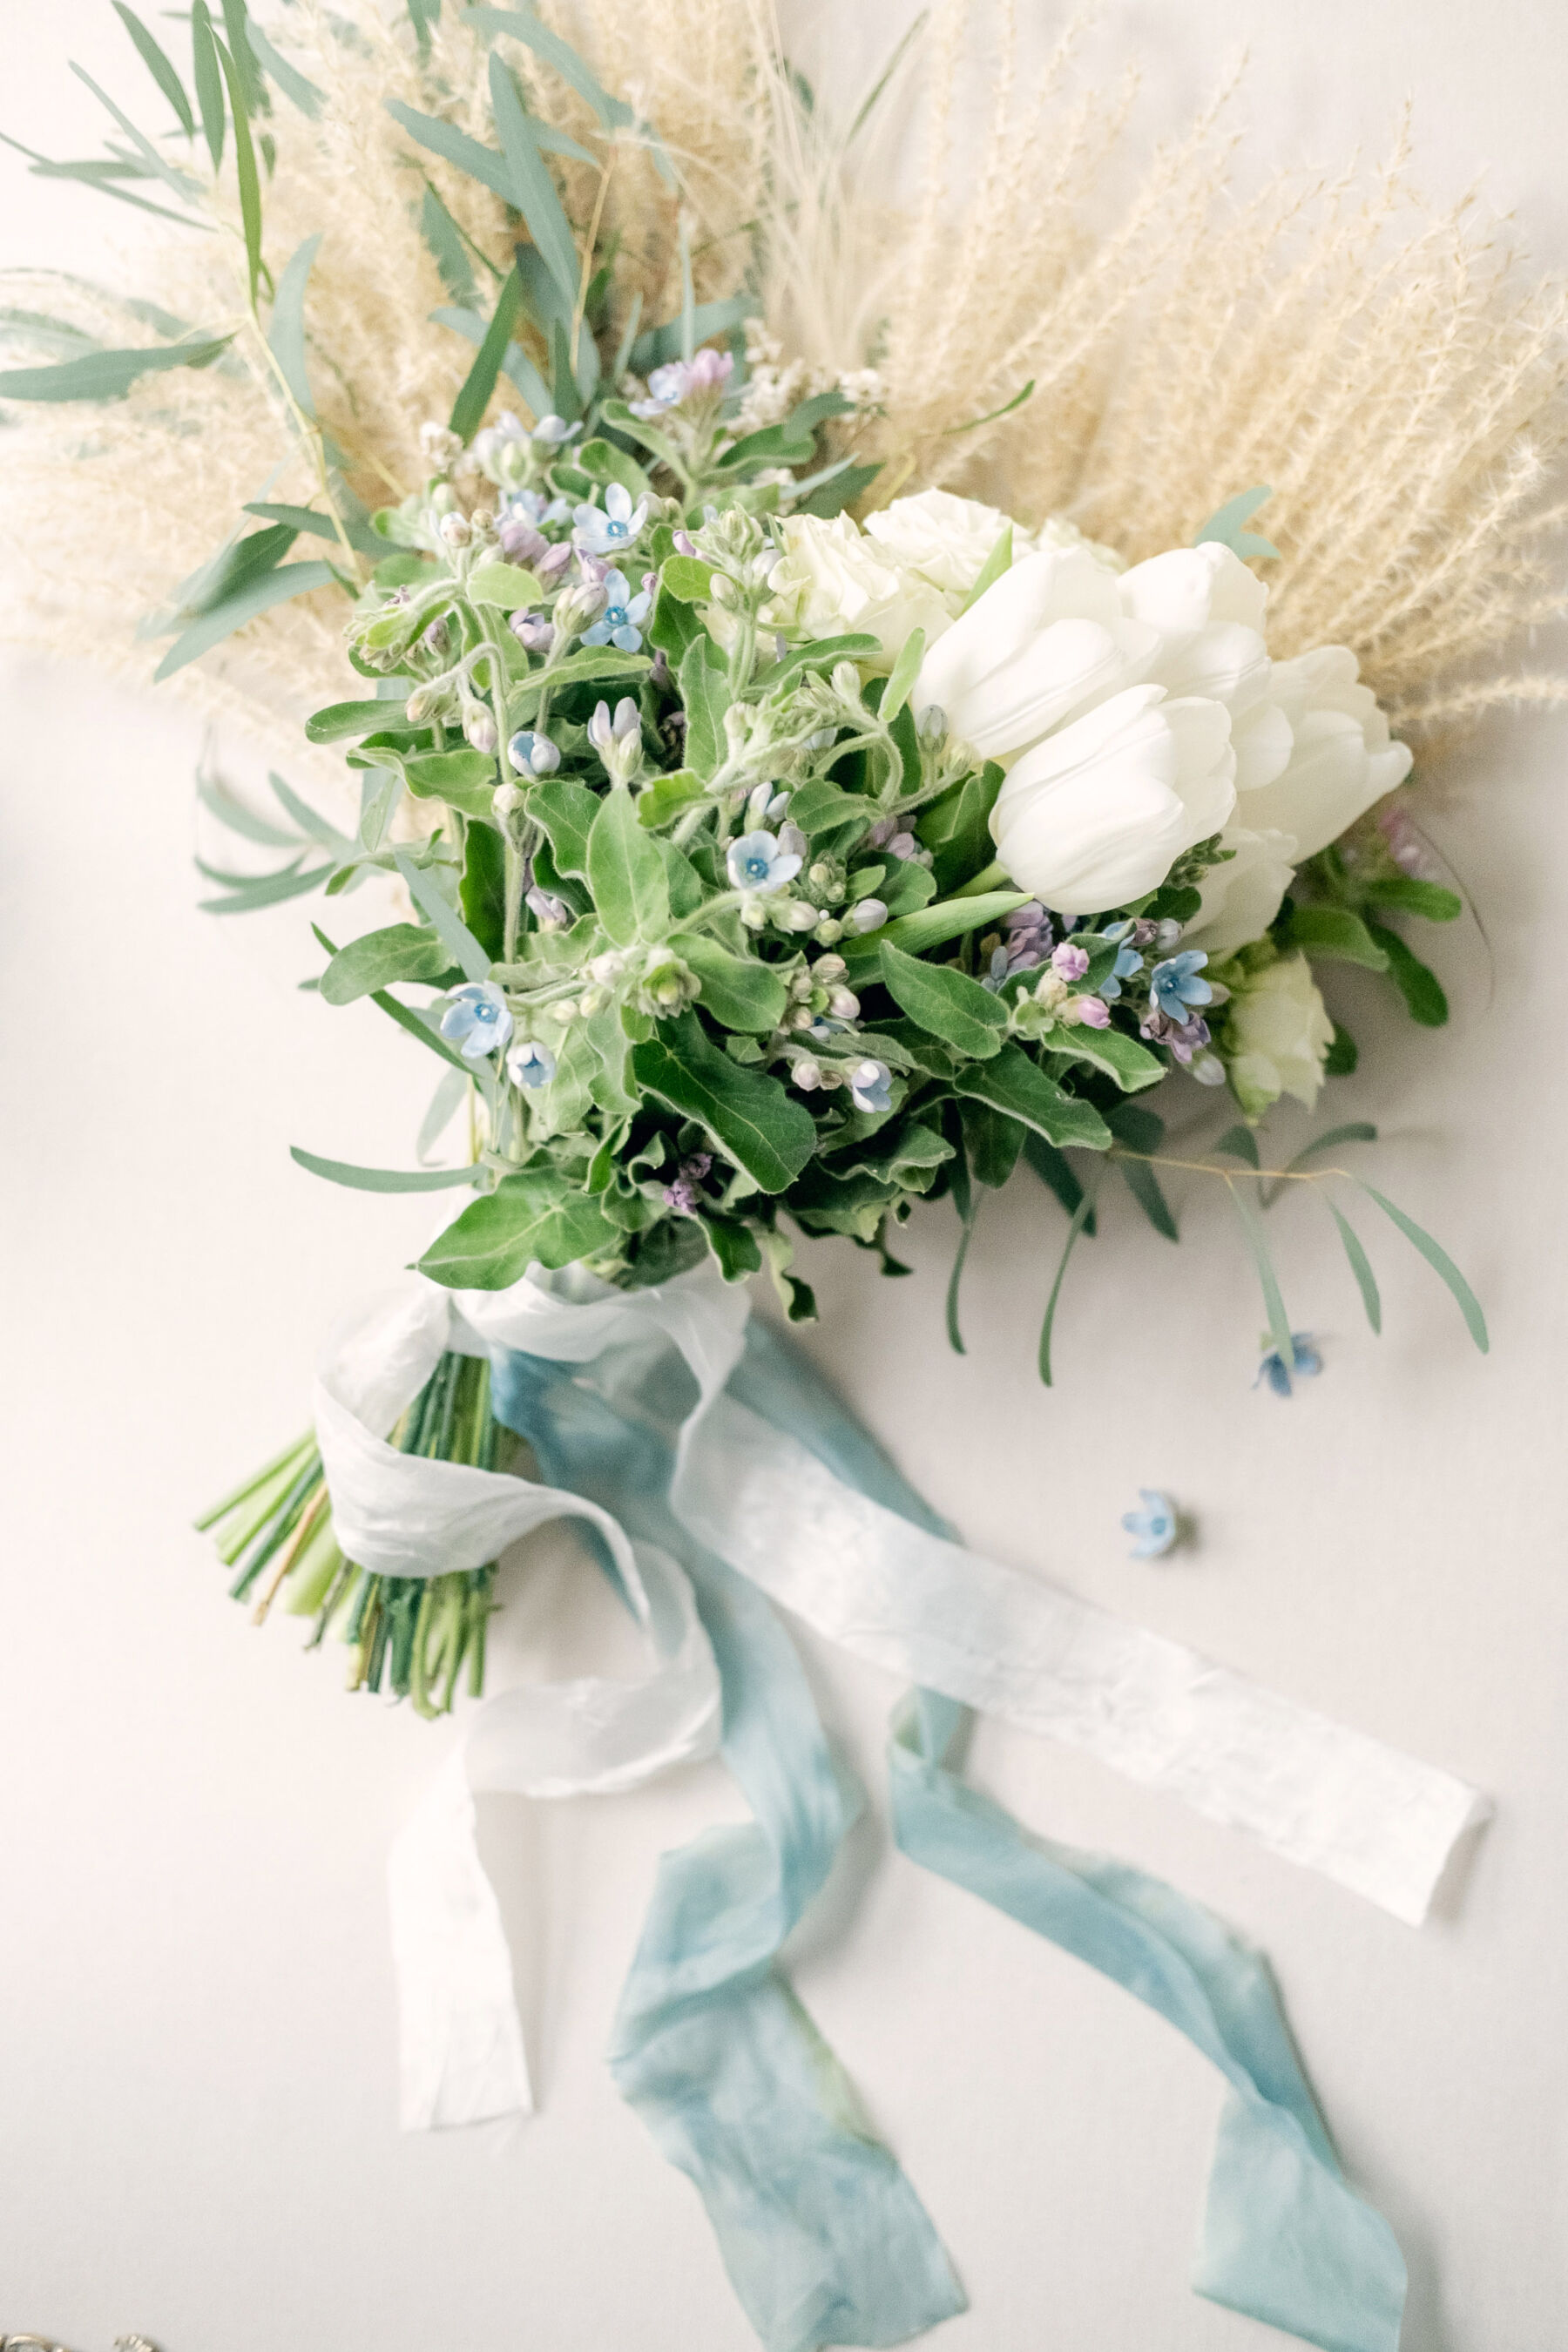 English flowers wedding bouquet with roses and Tweedia. Cream and pale blue silk ribbons tied around the flowers.